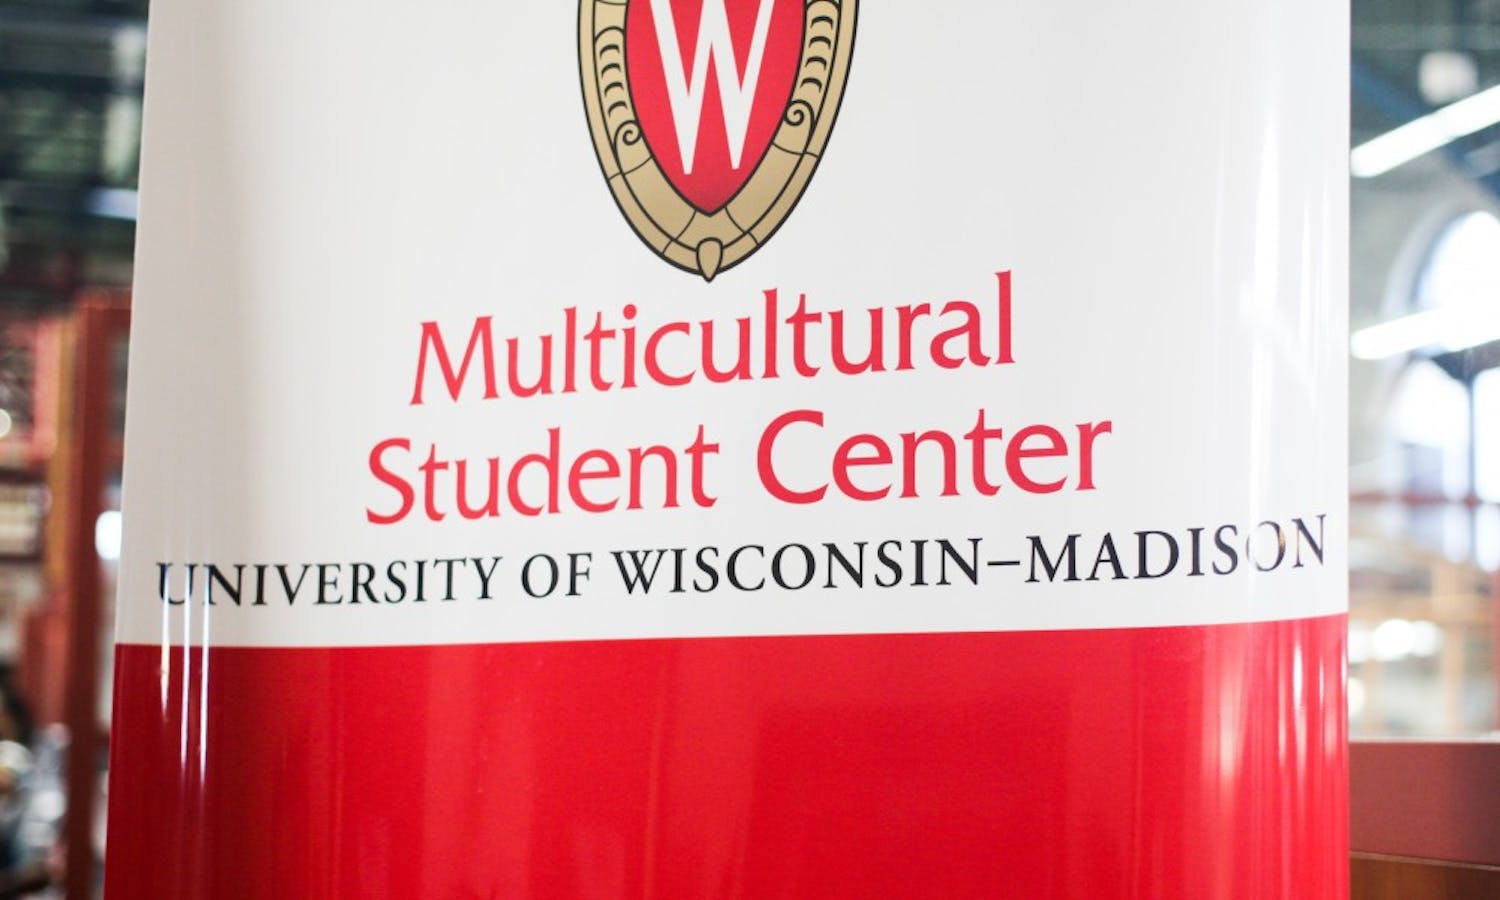 Associated Students of Madison, Jewop and The Impact movement were among the various multicultural student organizations featured at the festival hosted in the Multicultural Student Center Tuesday evening.